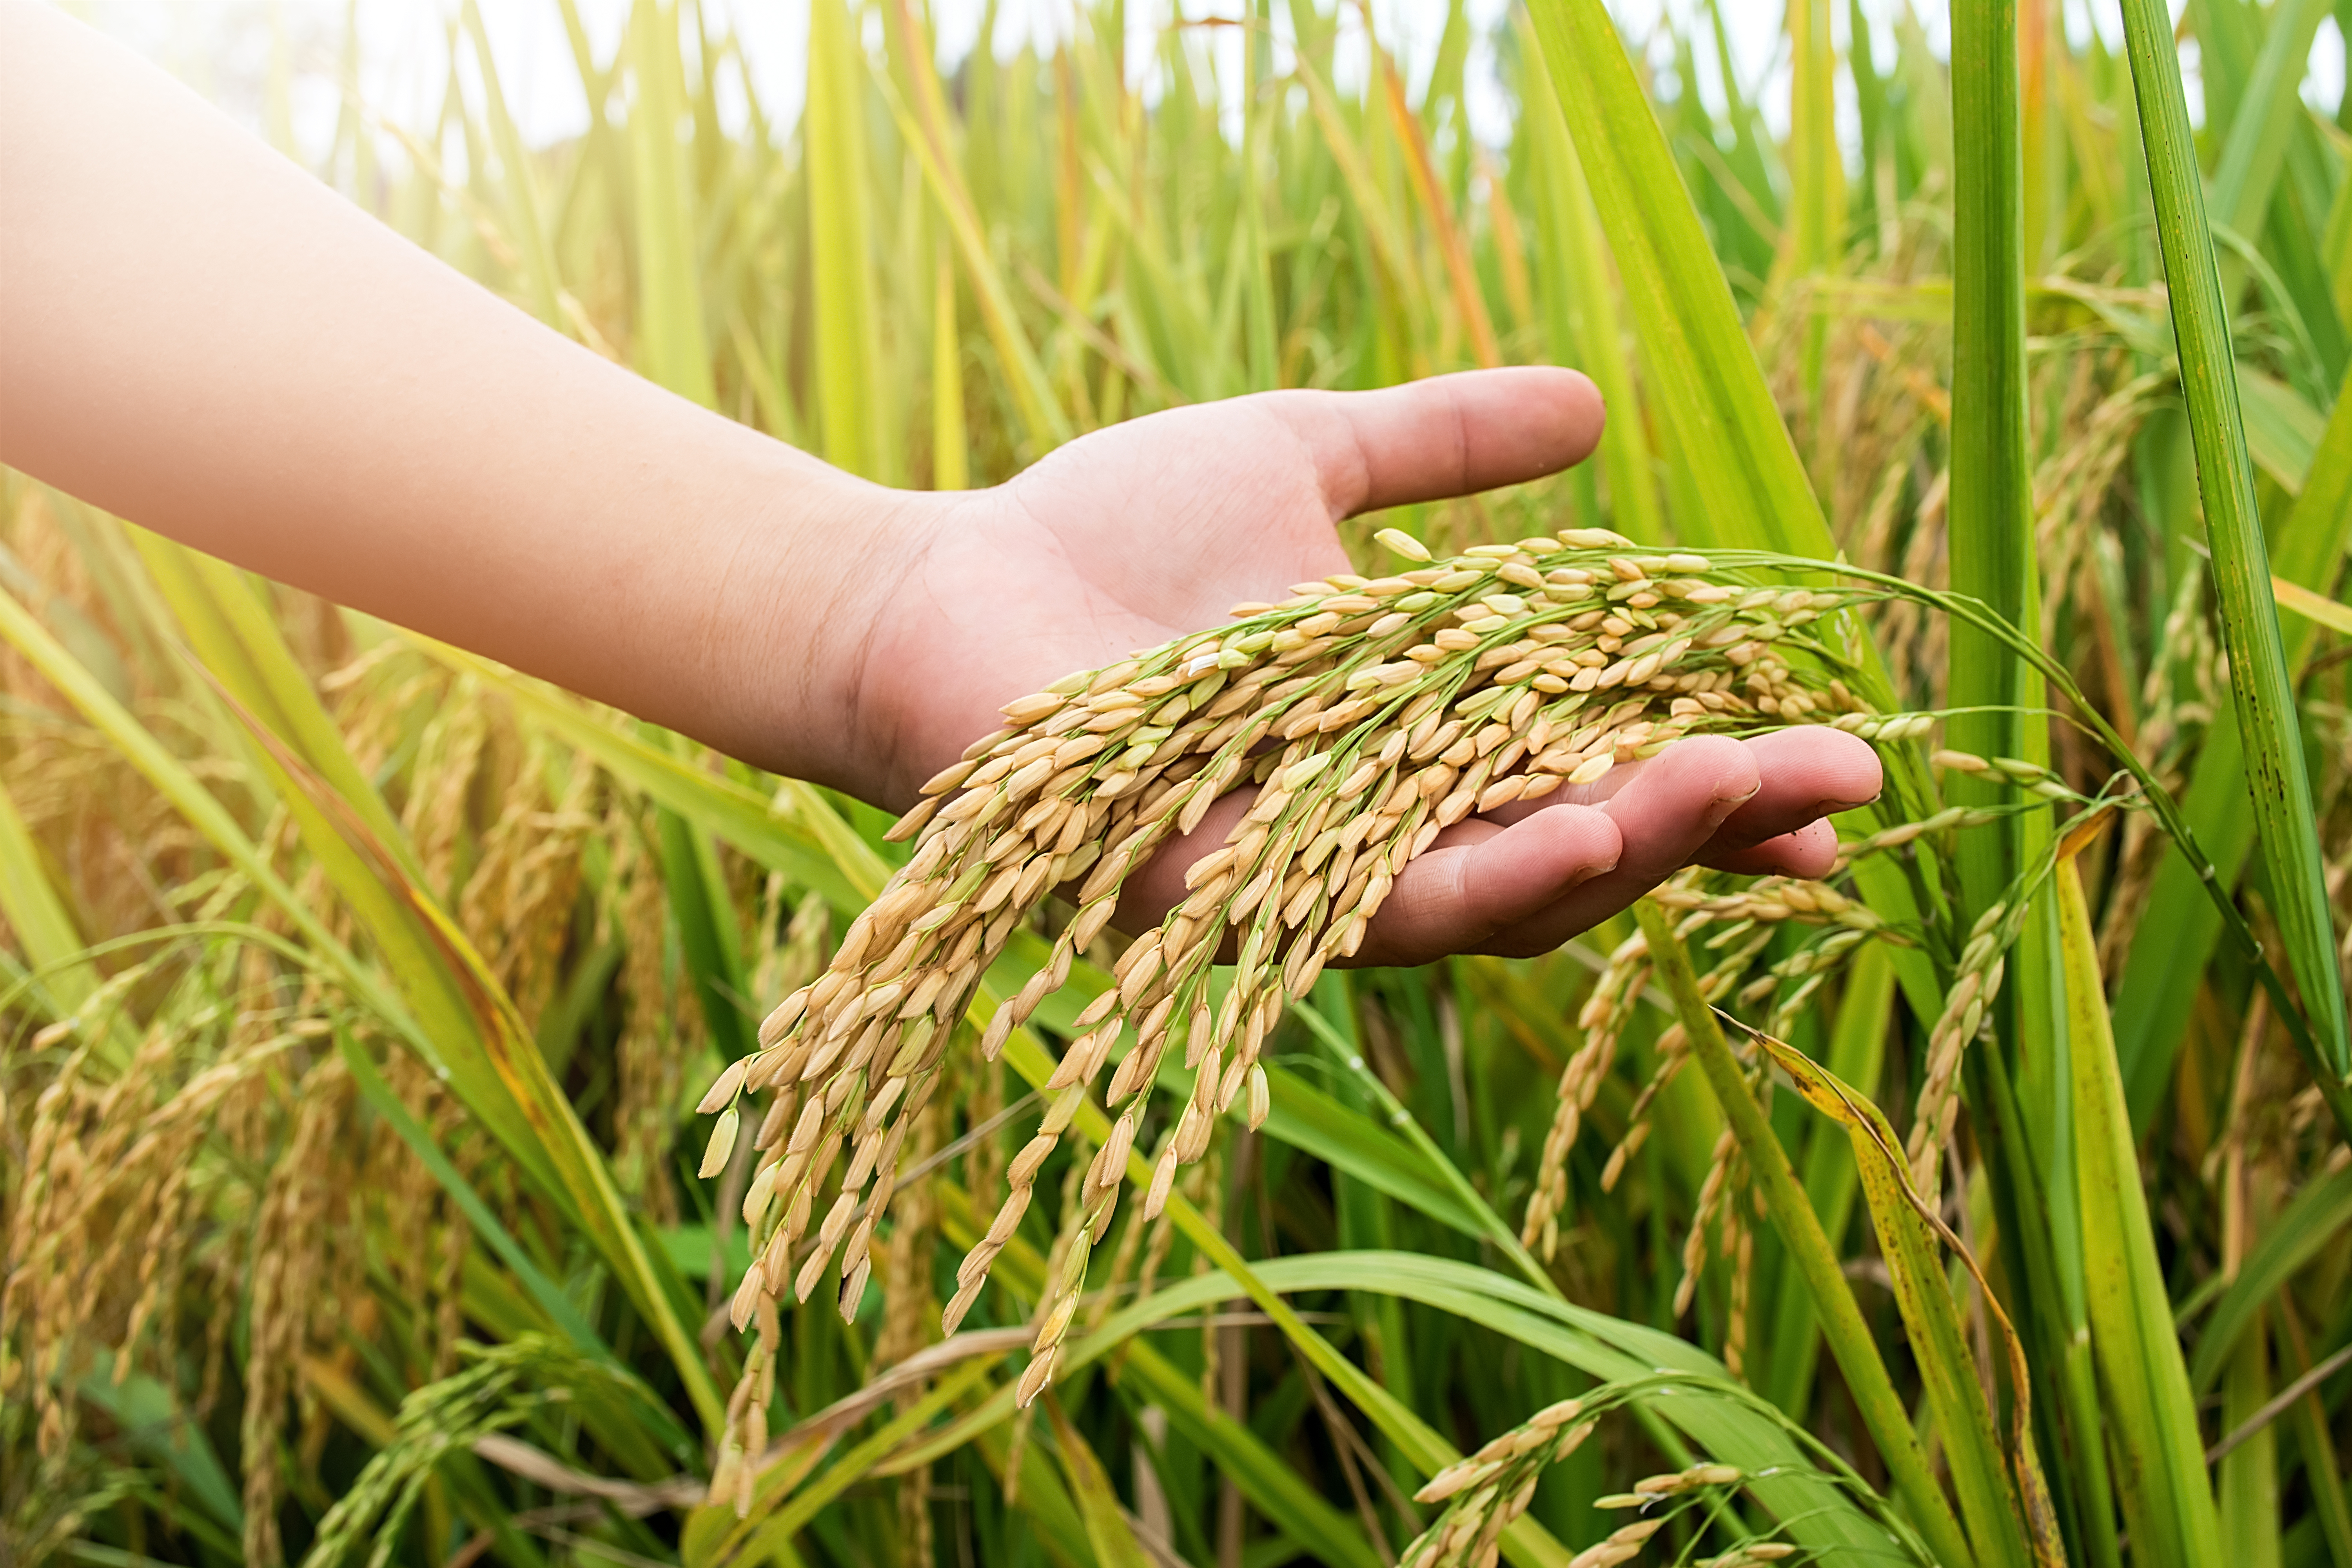 Indigo Agriculture and Anheuser-Busch Partner To Meet Sustainability Goals for Rice Production